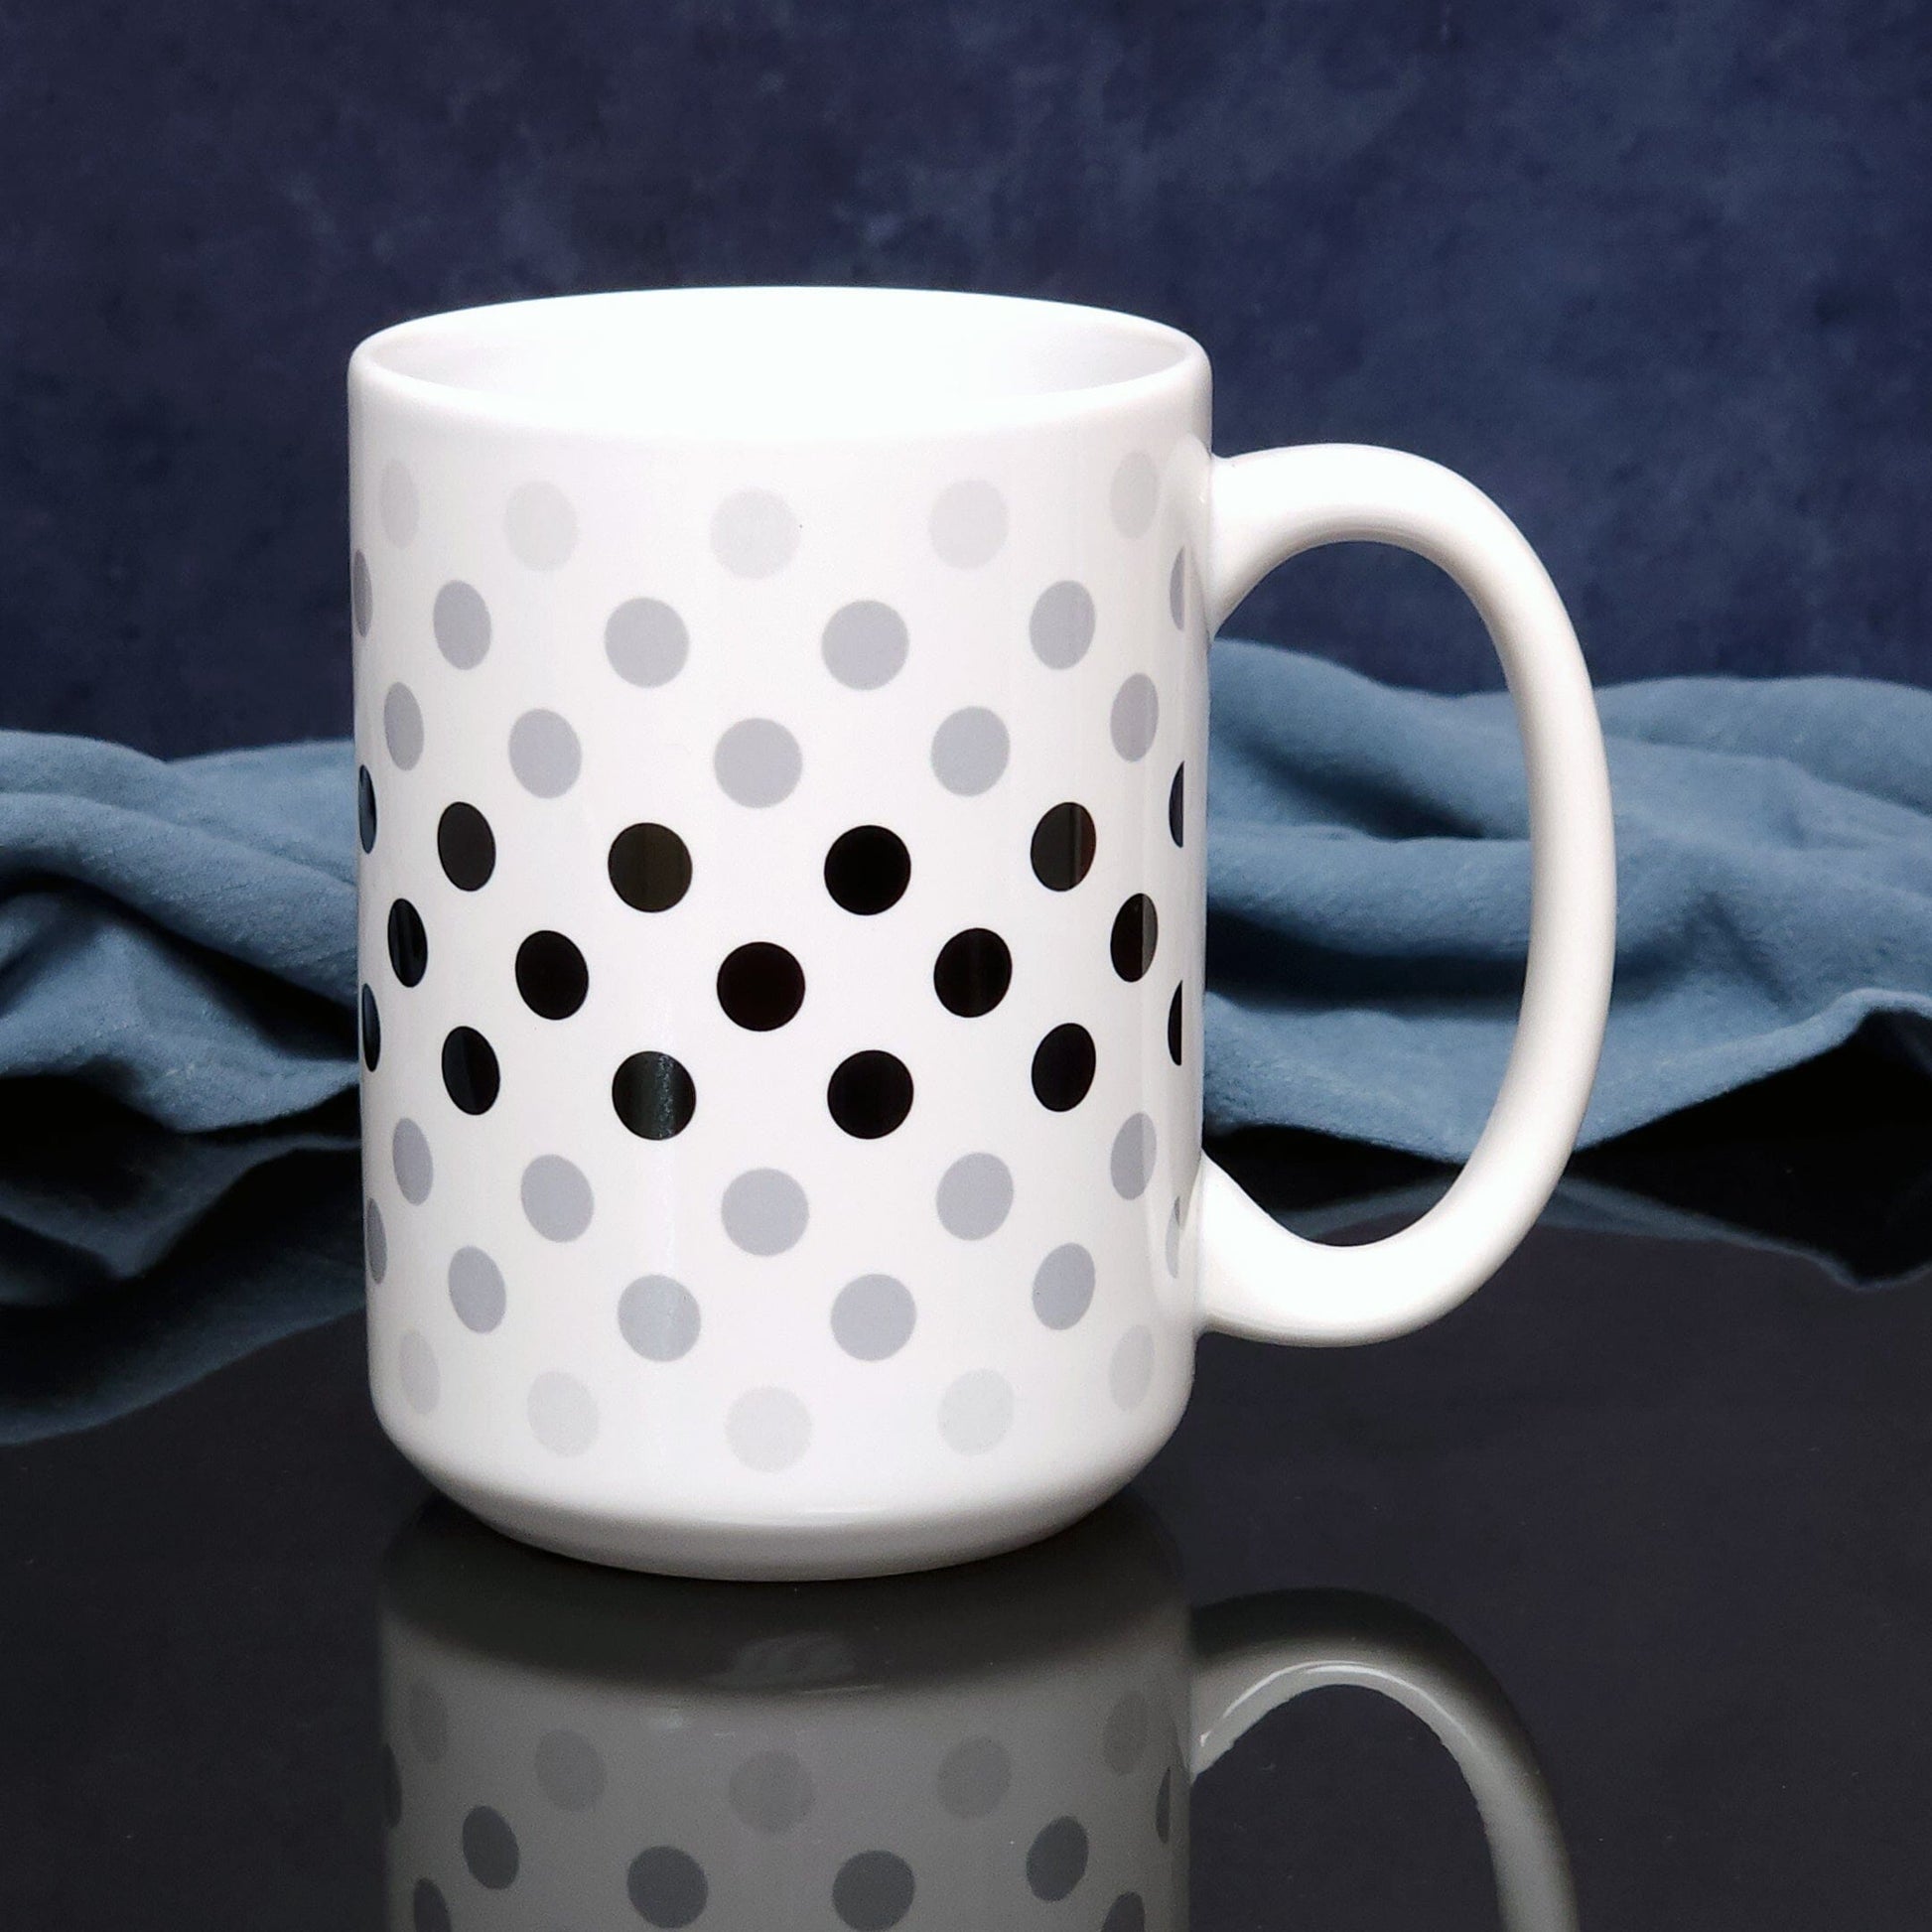 Polka Dots in Black Gray Mug (15oz) on a glossy black tabletop with a midnight blue background.. A ceramic coffee mug designed with polka dots in different shades of black and gray, with the black across the middle and the lighter shades of gray along the top and bottom, in a pattern that wraps around the mug to the handle. 